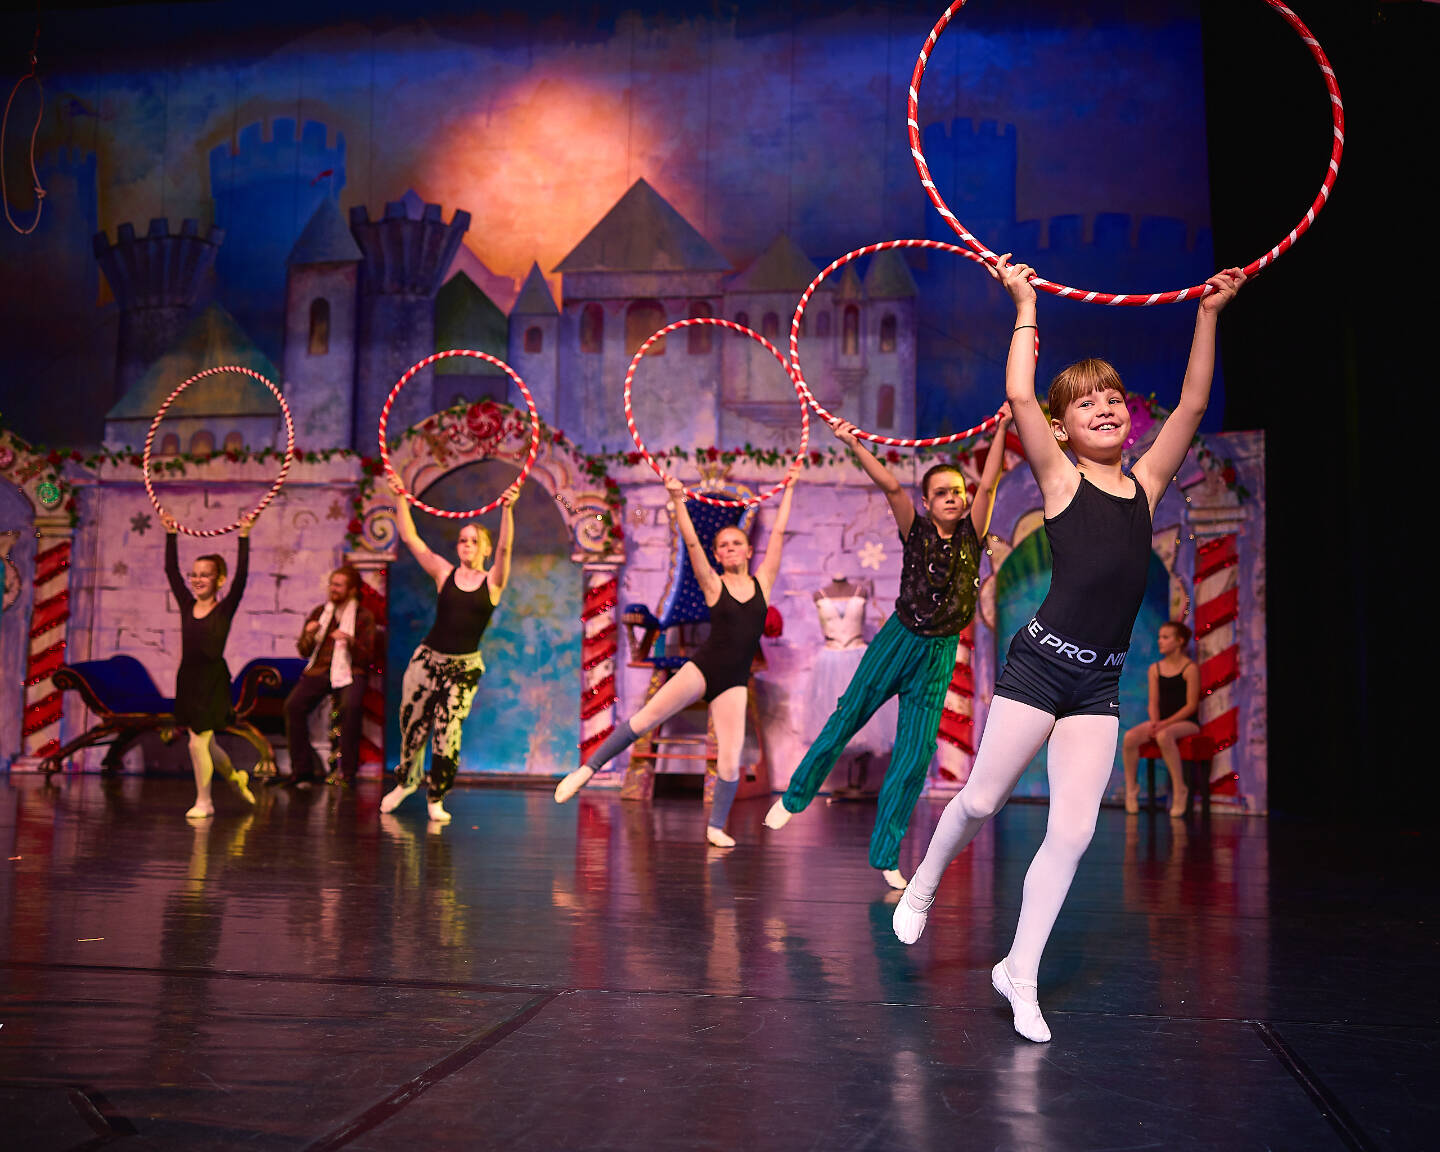 (from left to right) Nutcracker ballet performers Isaiah Kincaid, Brenda Pennington, Signe Jensen, Oona Faucher, and Haddie Kincaid rehearse the “Peppermints” dance onstage at the Homer High School Mariner Theatre on Sunday, Nov. 19, 2023 in Homer, Alaska. August Kilcher (left rear) and Lila Shavelson (right rear) watch the dancers practice. Photo by Chris Kincaid.